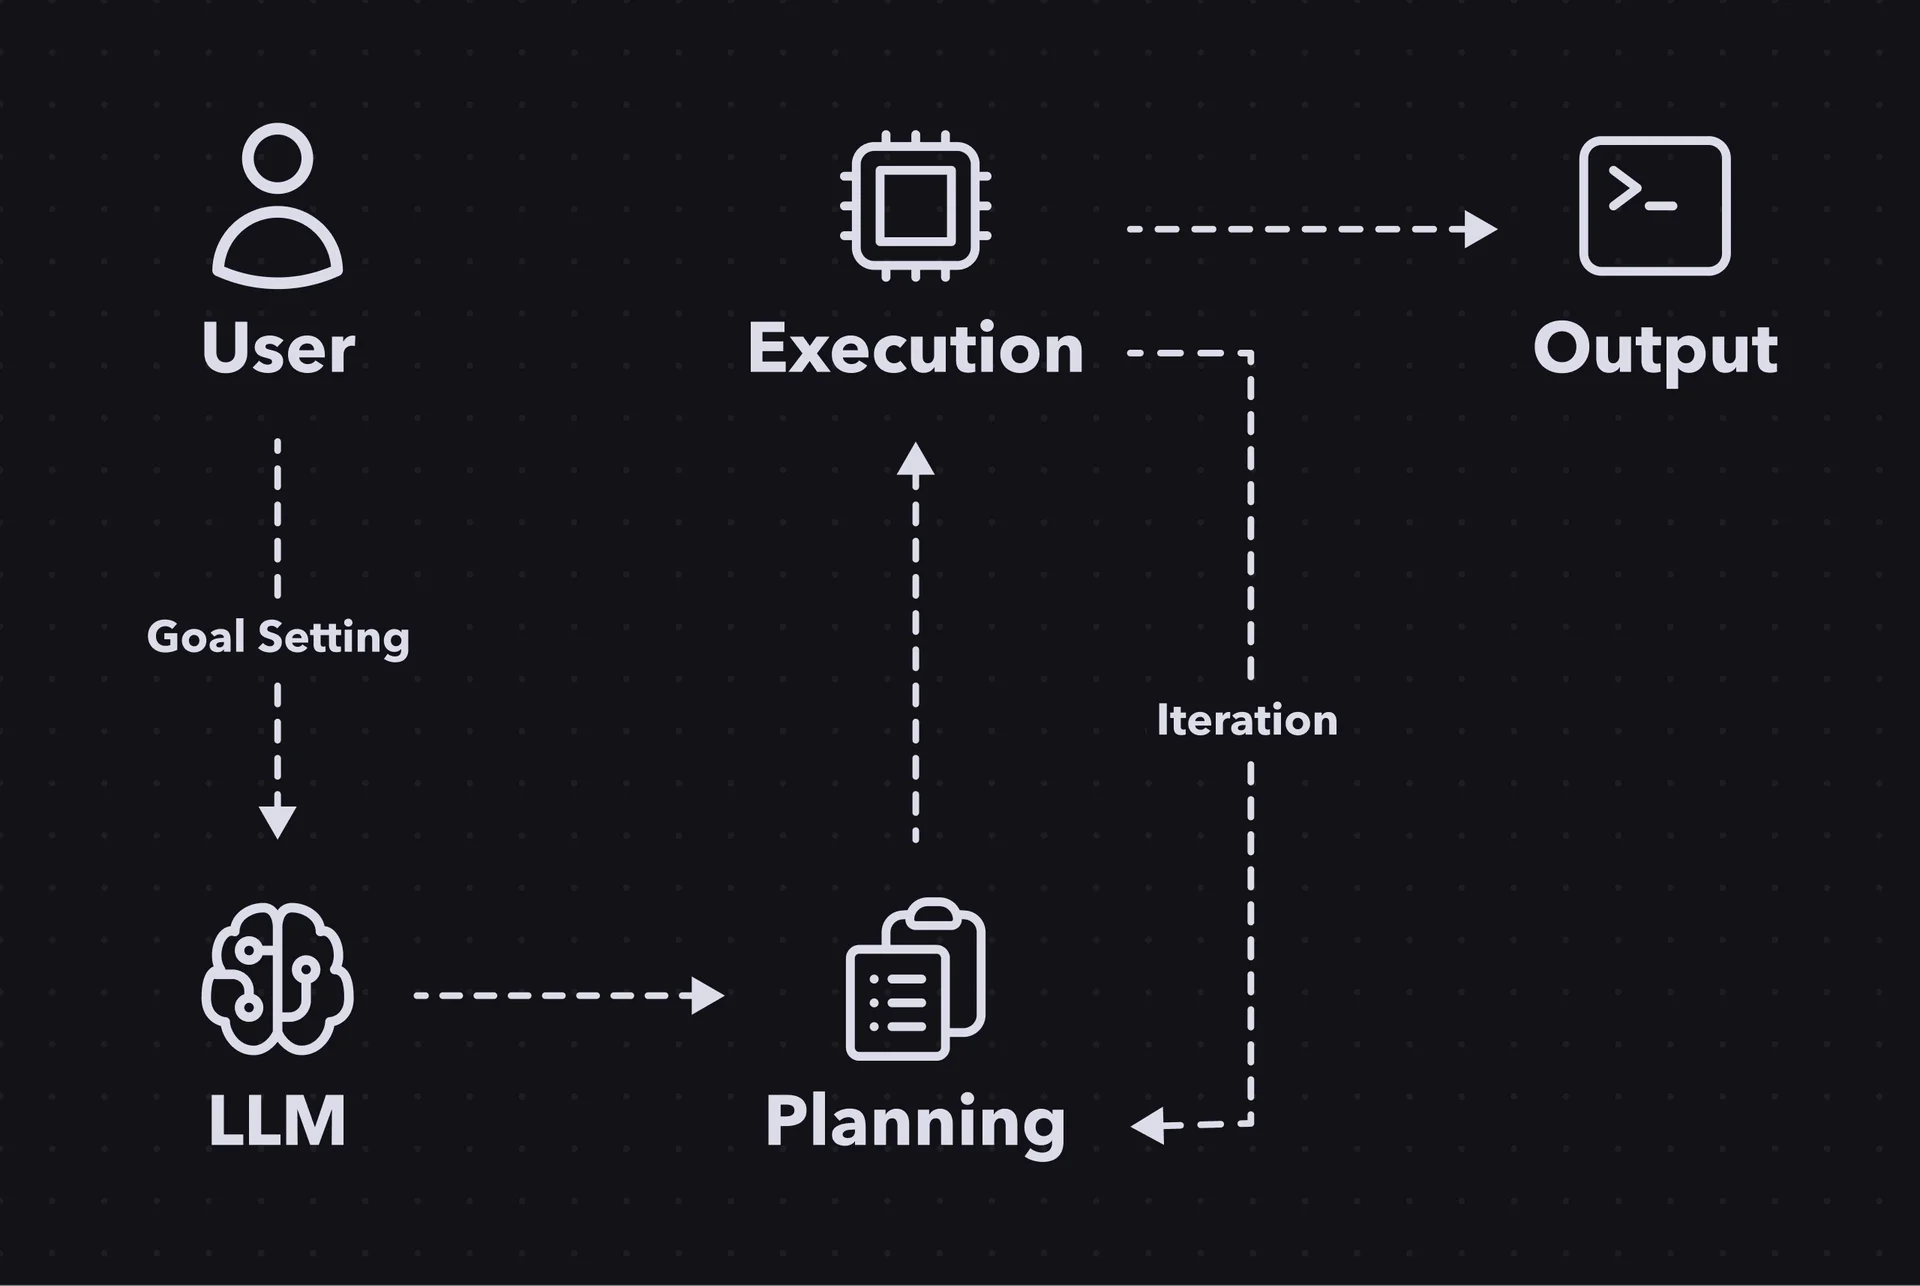 A diagram with icons showing the user, the LLM, a list for task planning, and a cloud representing execution. Each icon is connected by an arrow. There is an iteration arrow between the execution and task planning.